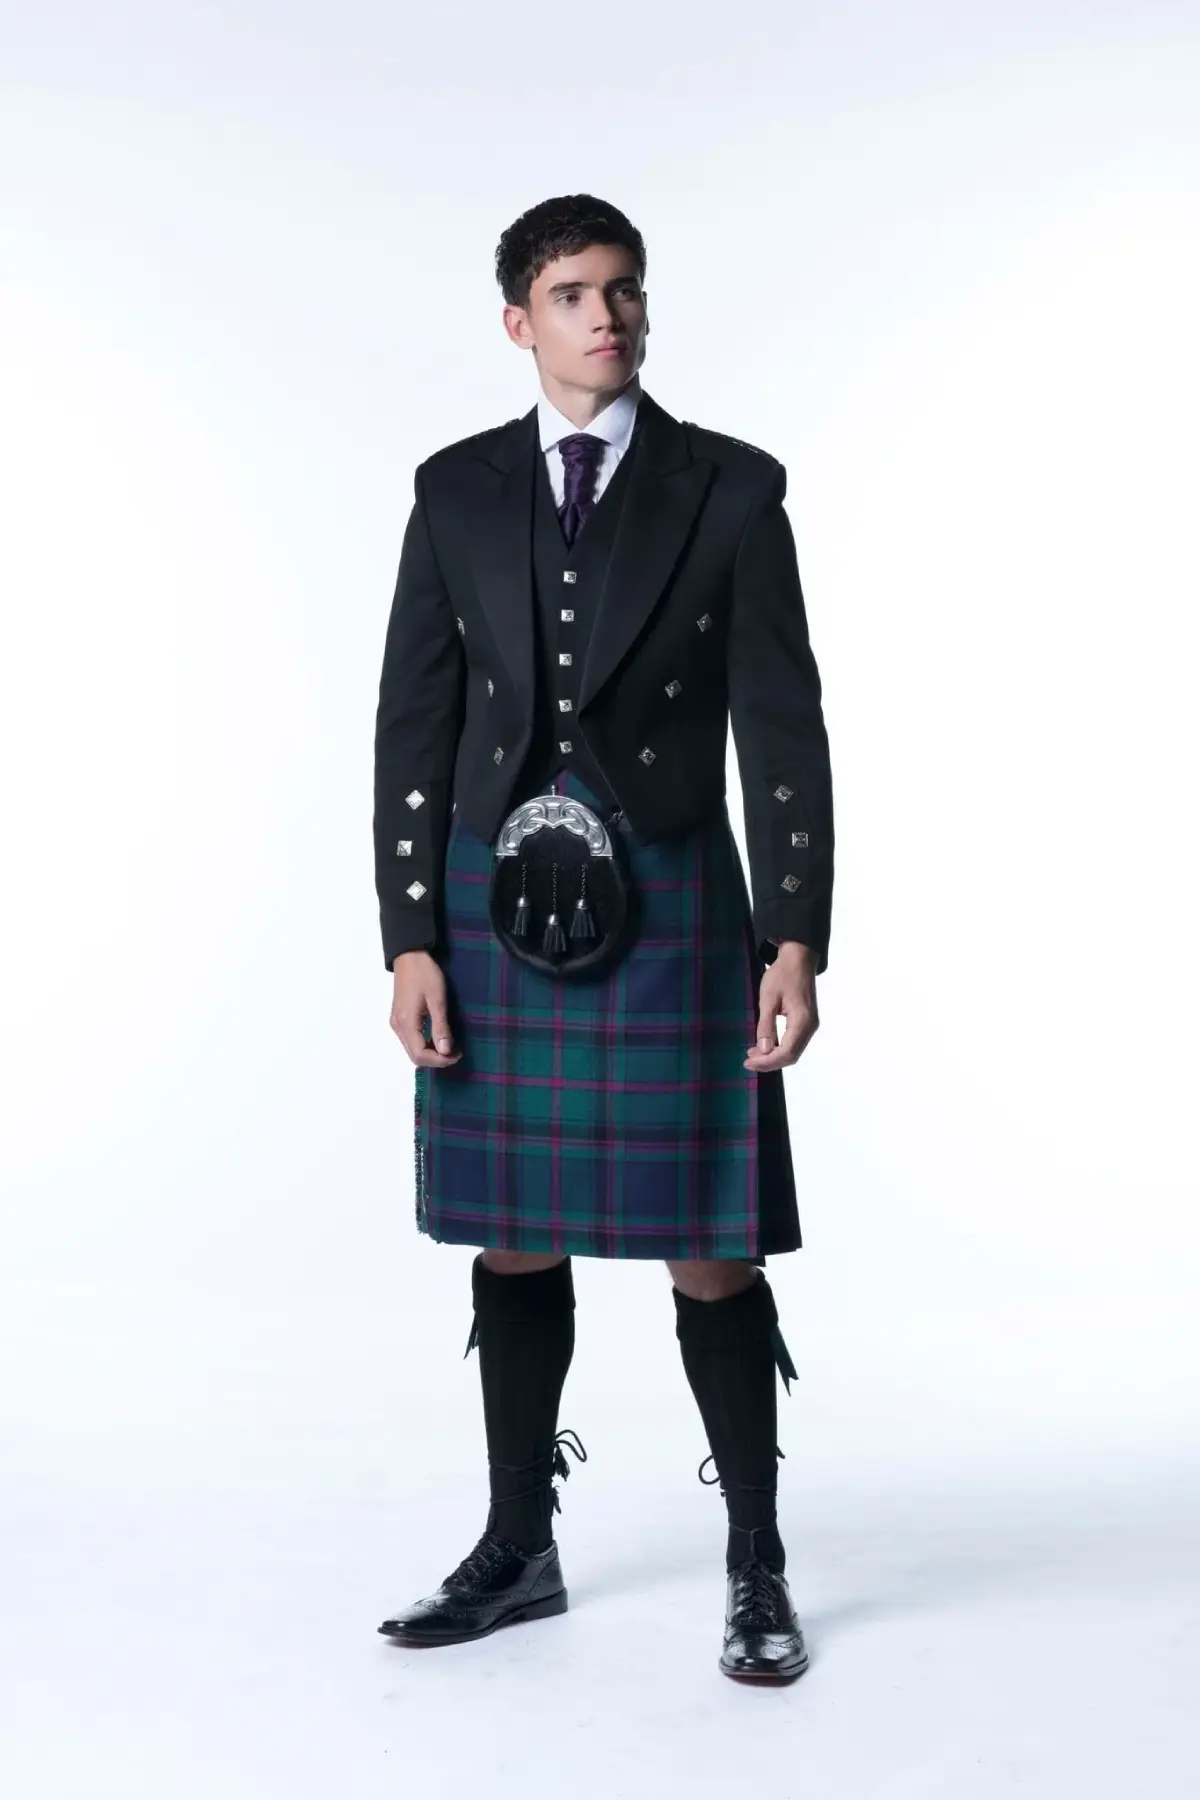 Prince-Charlie-Kilt-Outfit-with-5-button-vest (1)